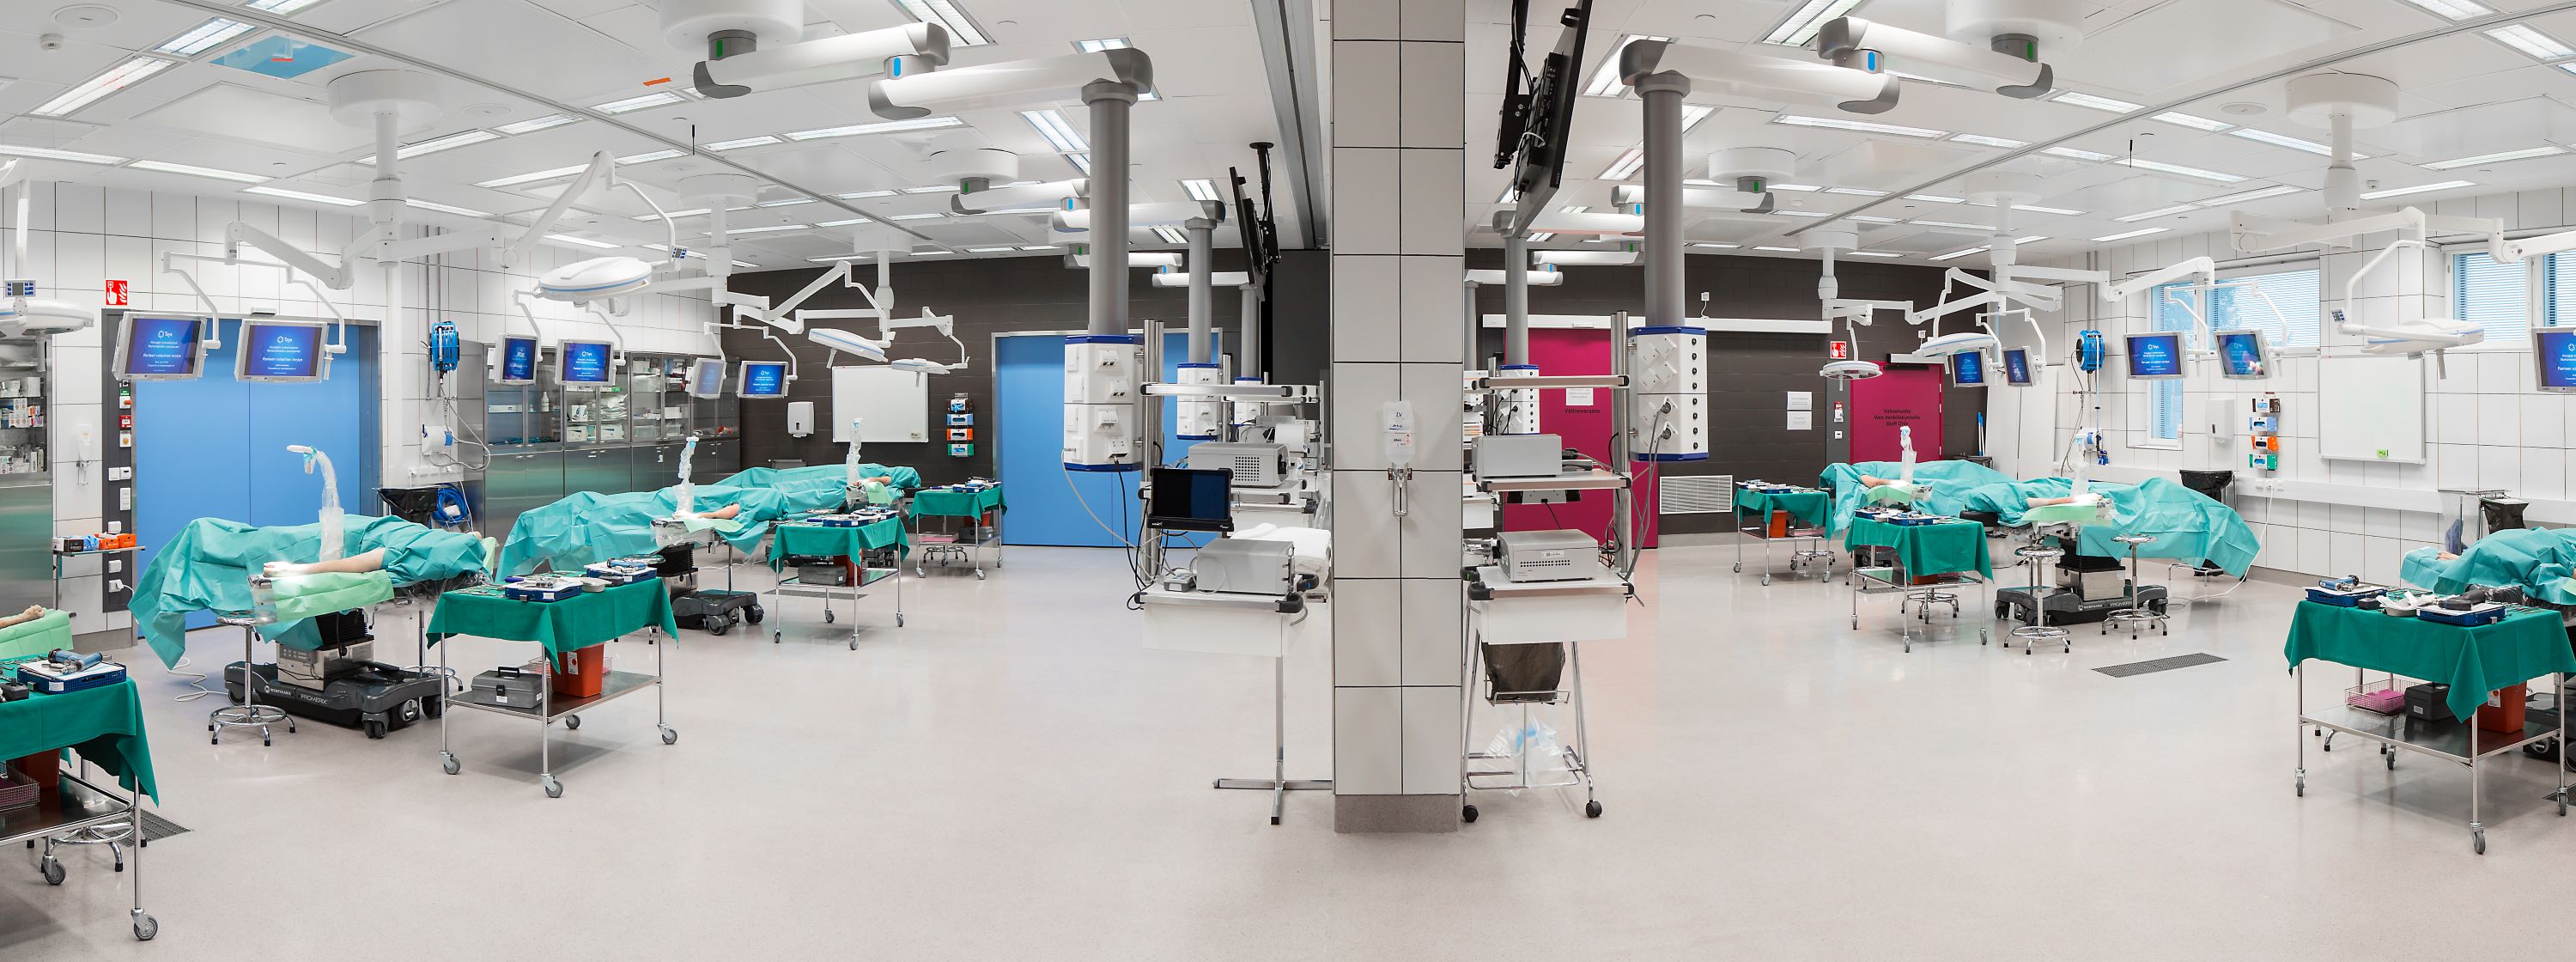 The surgical laboratory of the Tampere Surgical Education Centre.